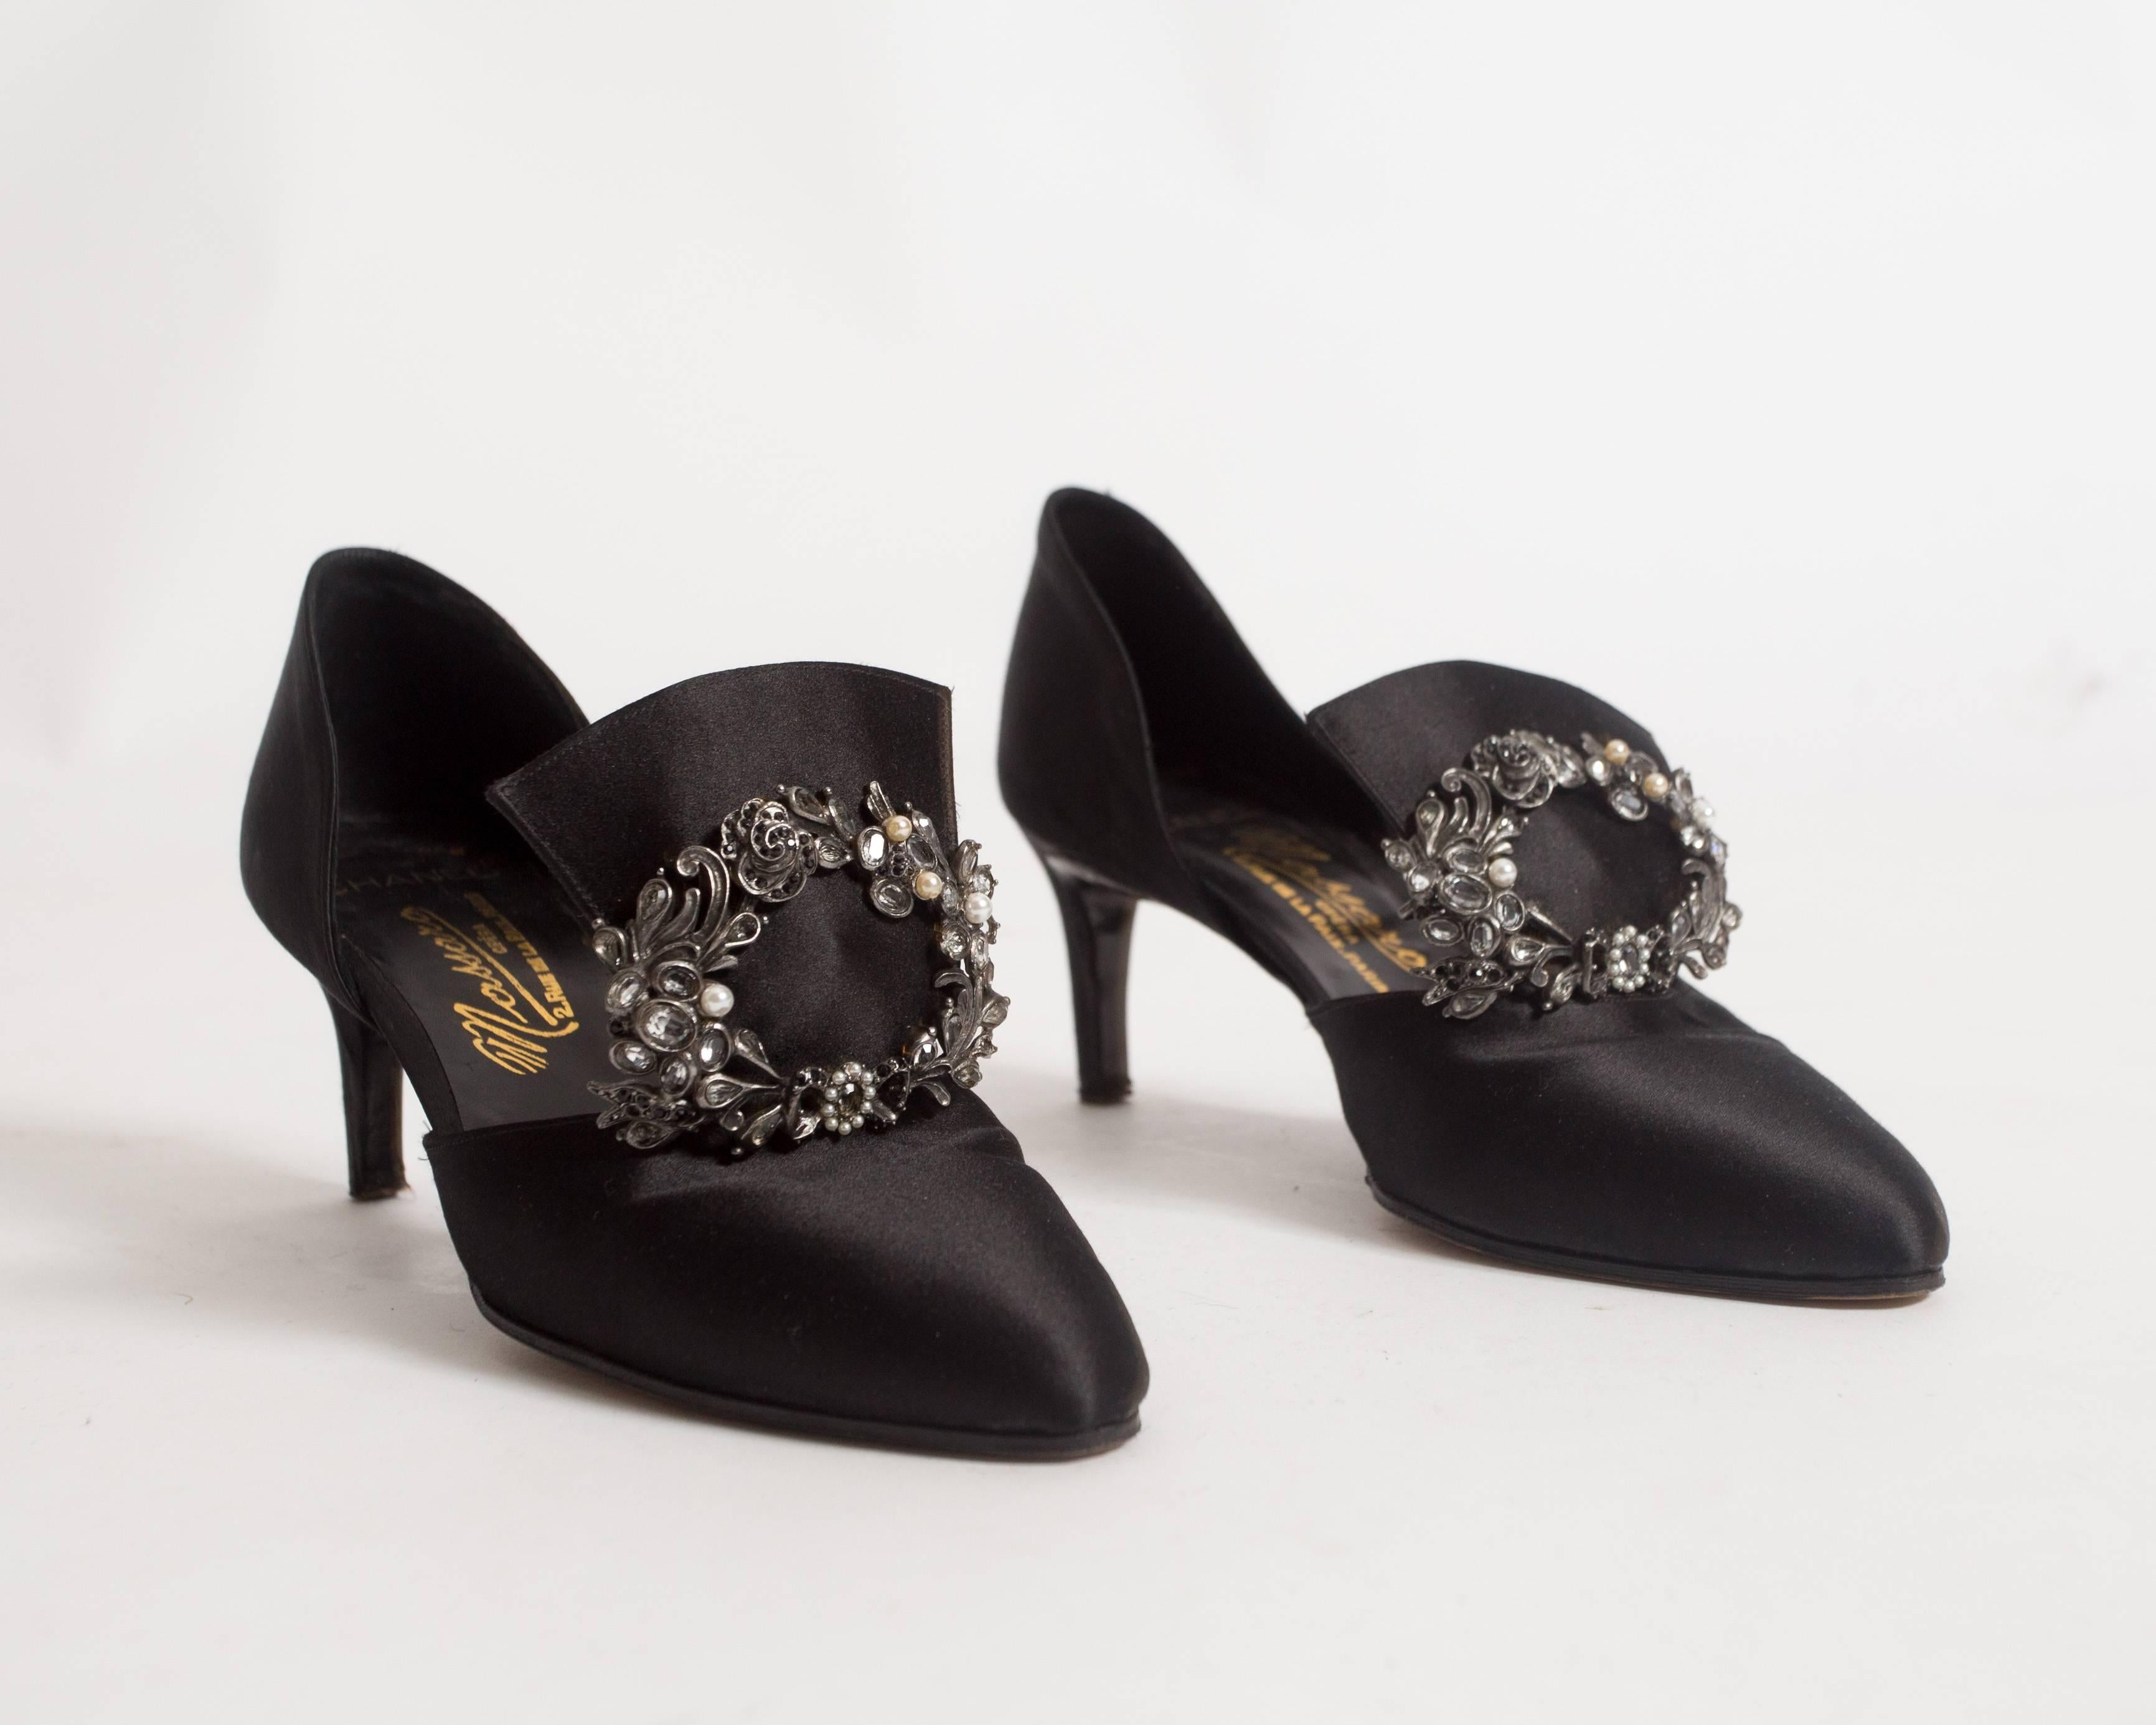 Chanel Haute Couture satin pumps with brooch by Massoro, circa 1950s at ...